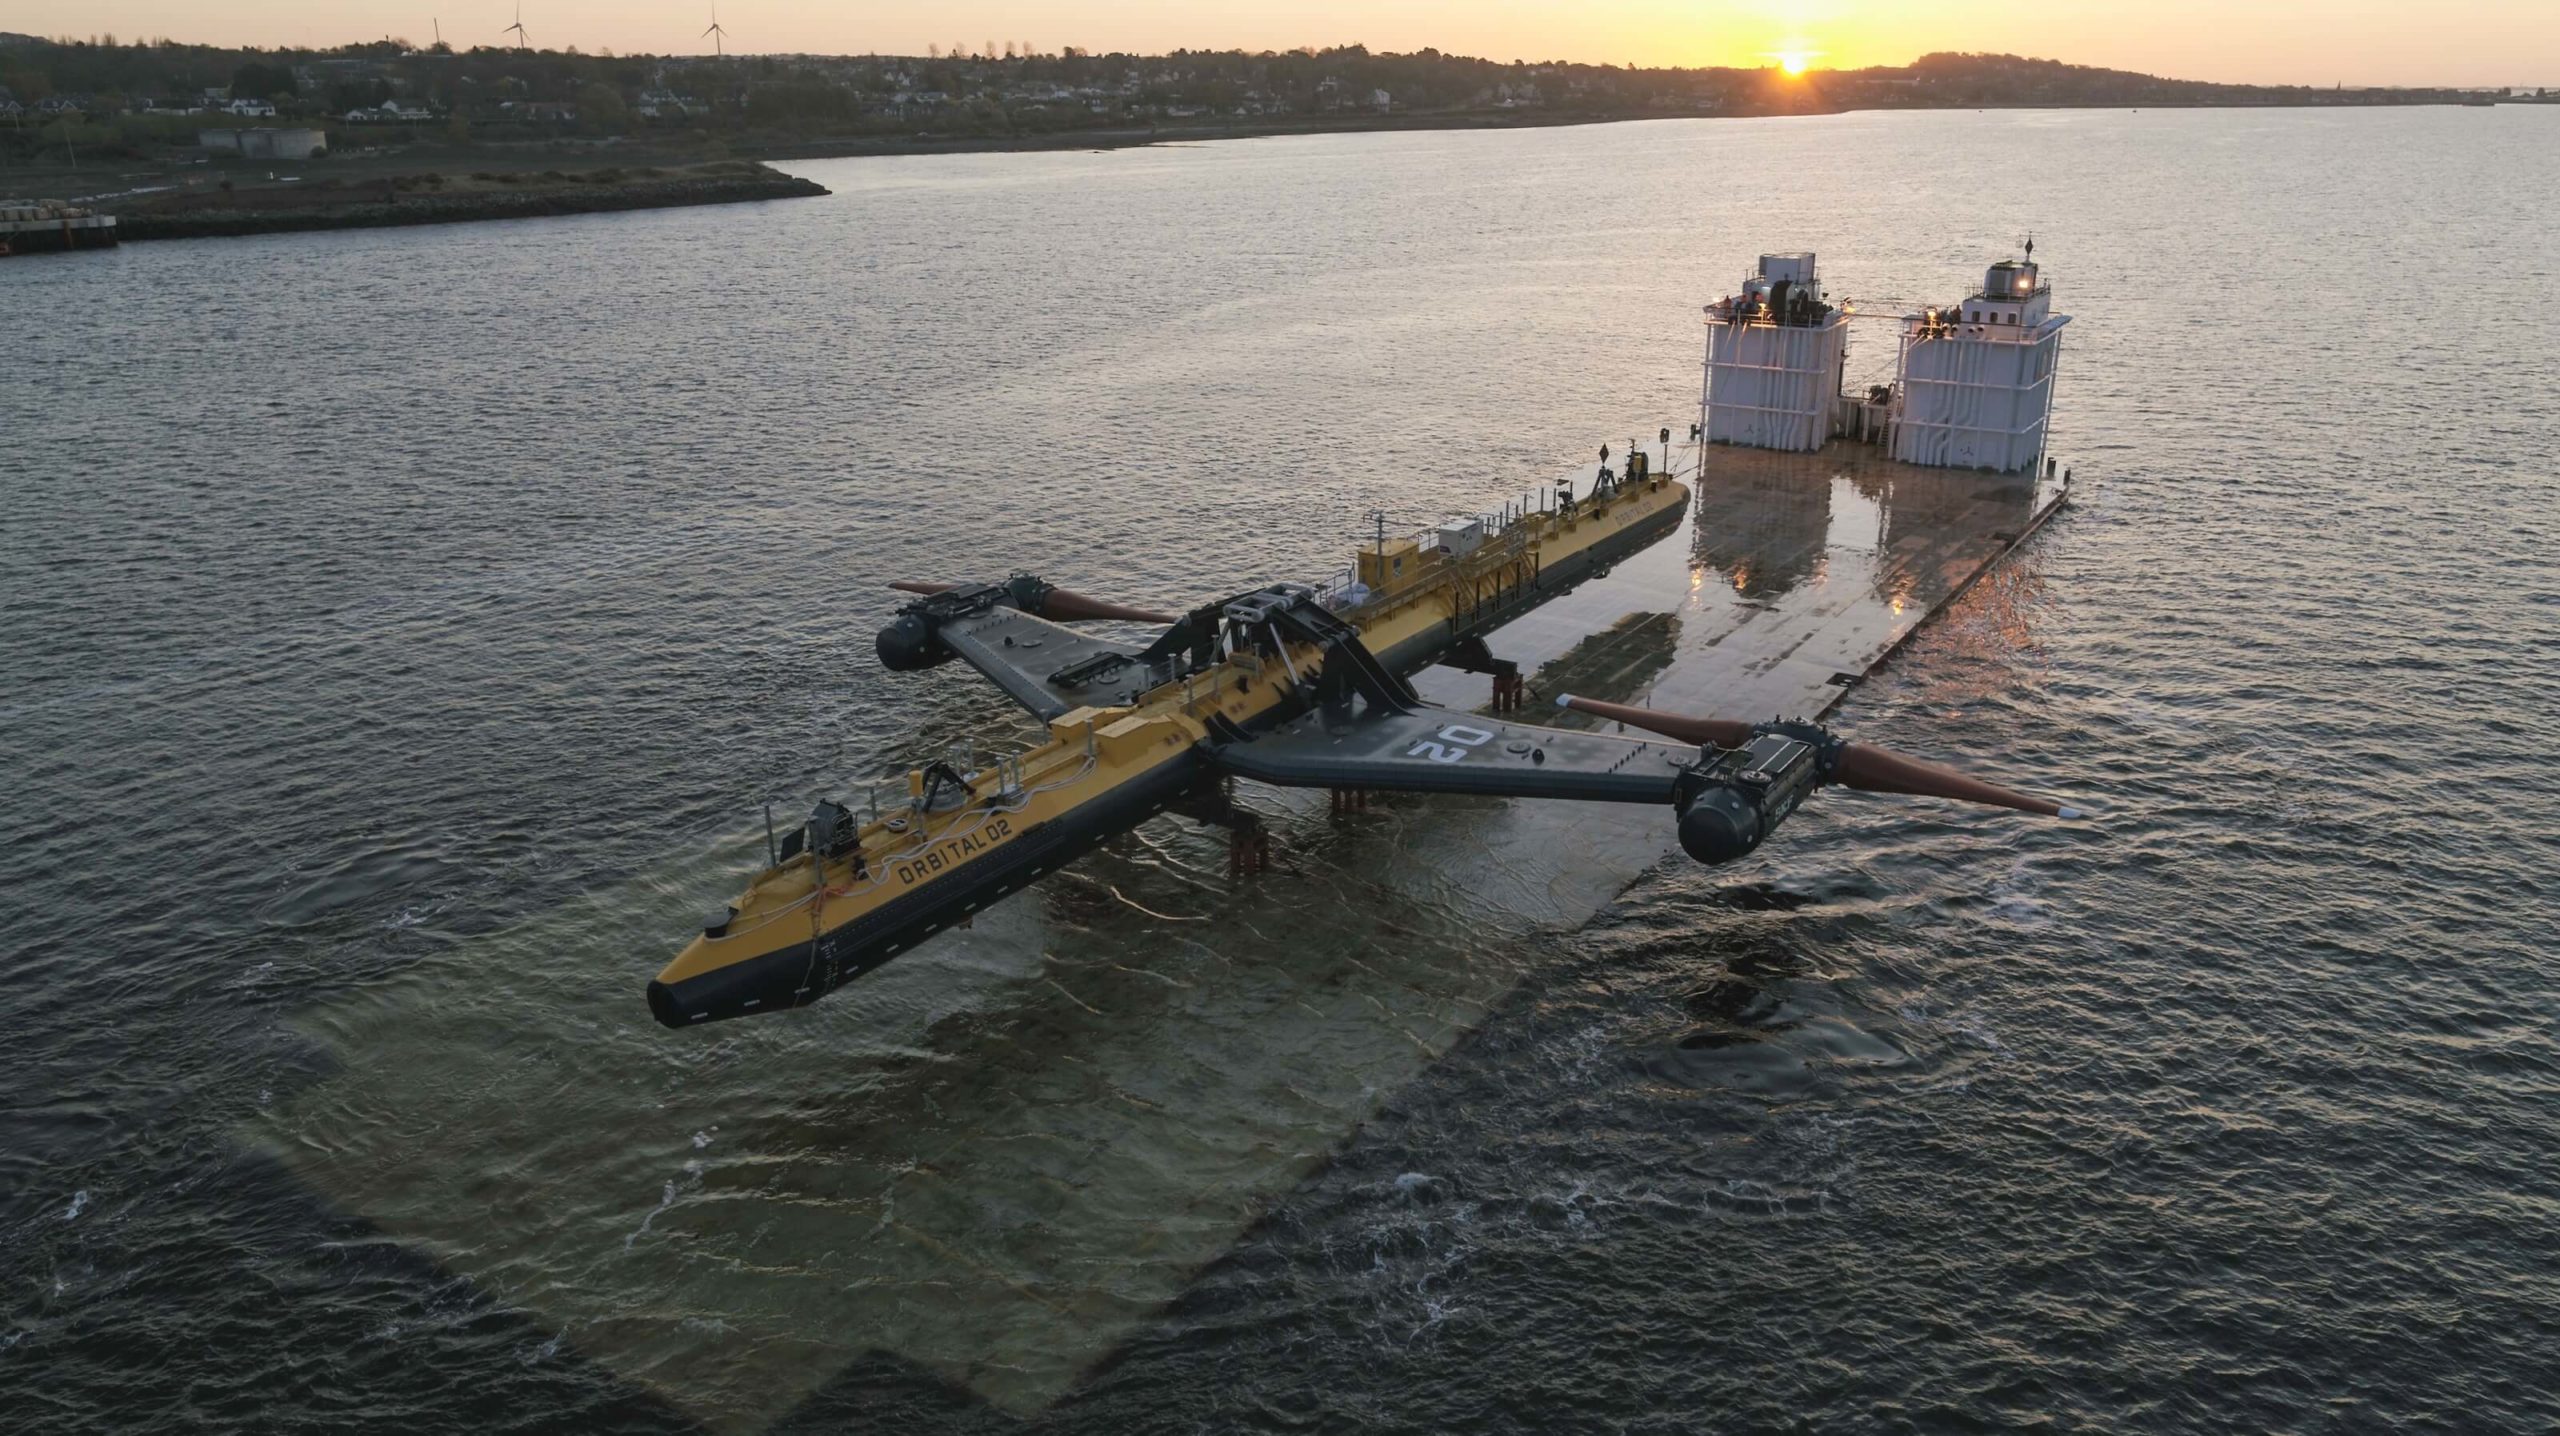 Orbital's O2 tidal turbine on a semi-submersible barge, on the River Tay, at sunset.